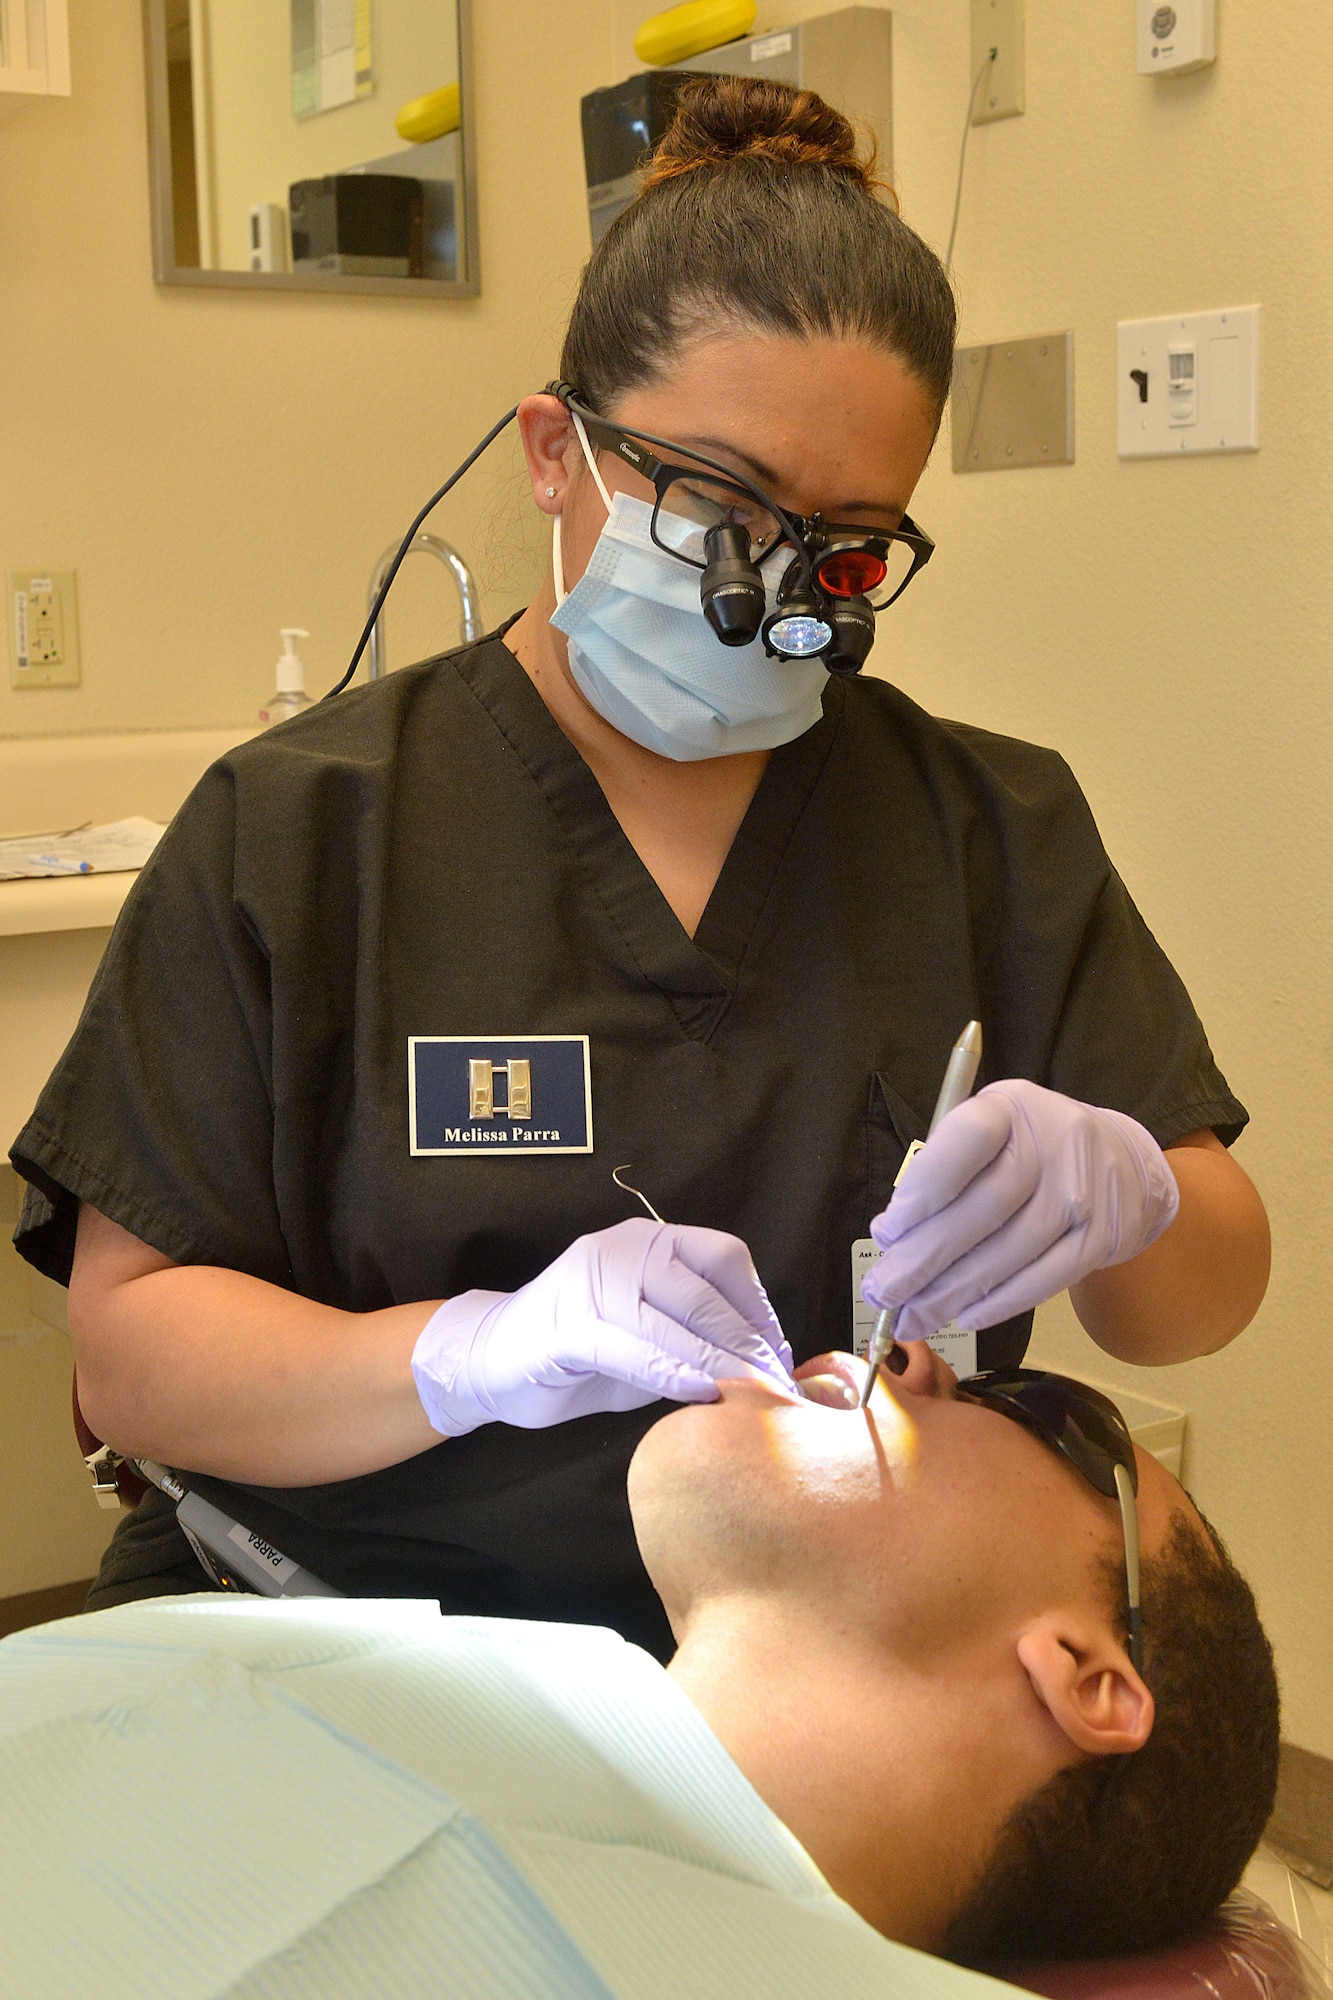 Capt. Melissa Parra, 5th Medical Operations Squadron clinical flight commander, performs an examination on a patient at Minot Air Force Base, N.D., Jan. 10, 2017. Examinations are helpful in determining gum health, and detecting oral cancer, and caries, better known as cavities. (U.S. Air Force photo/Airman 1st Class Jessica Weissman)